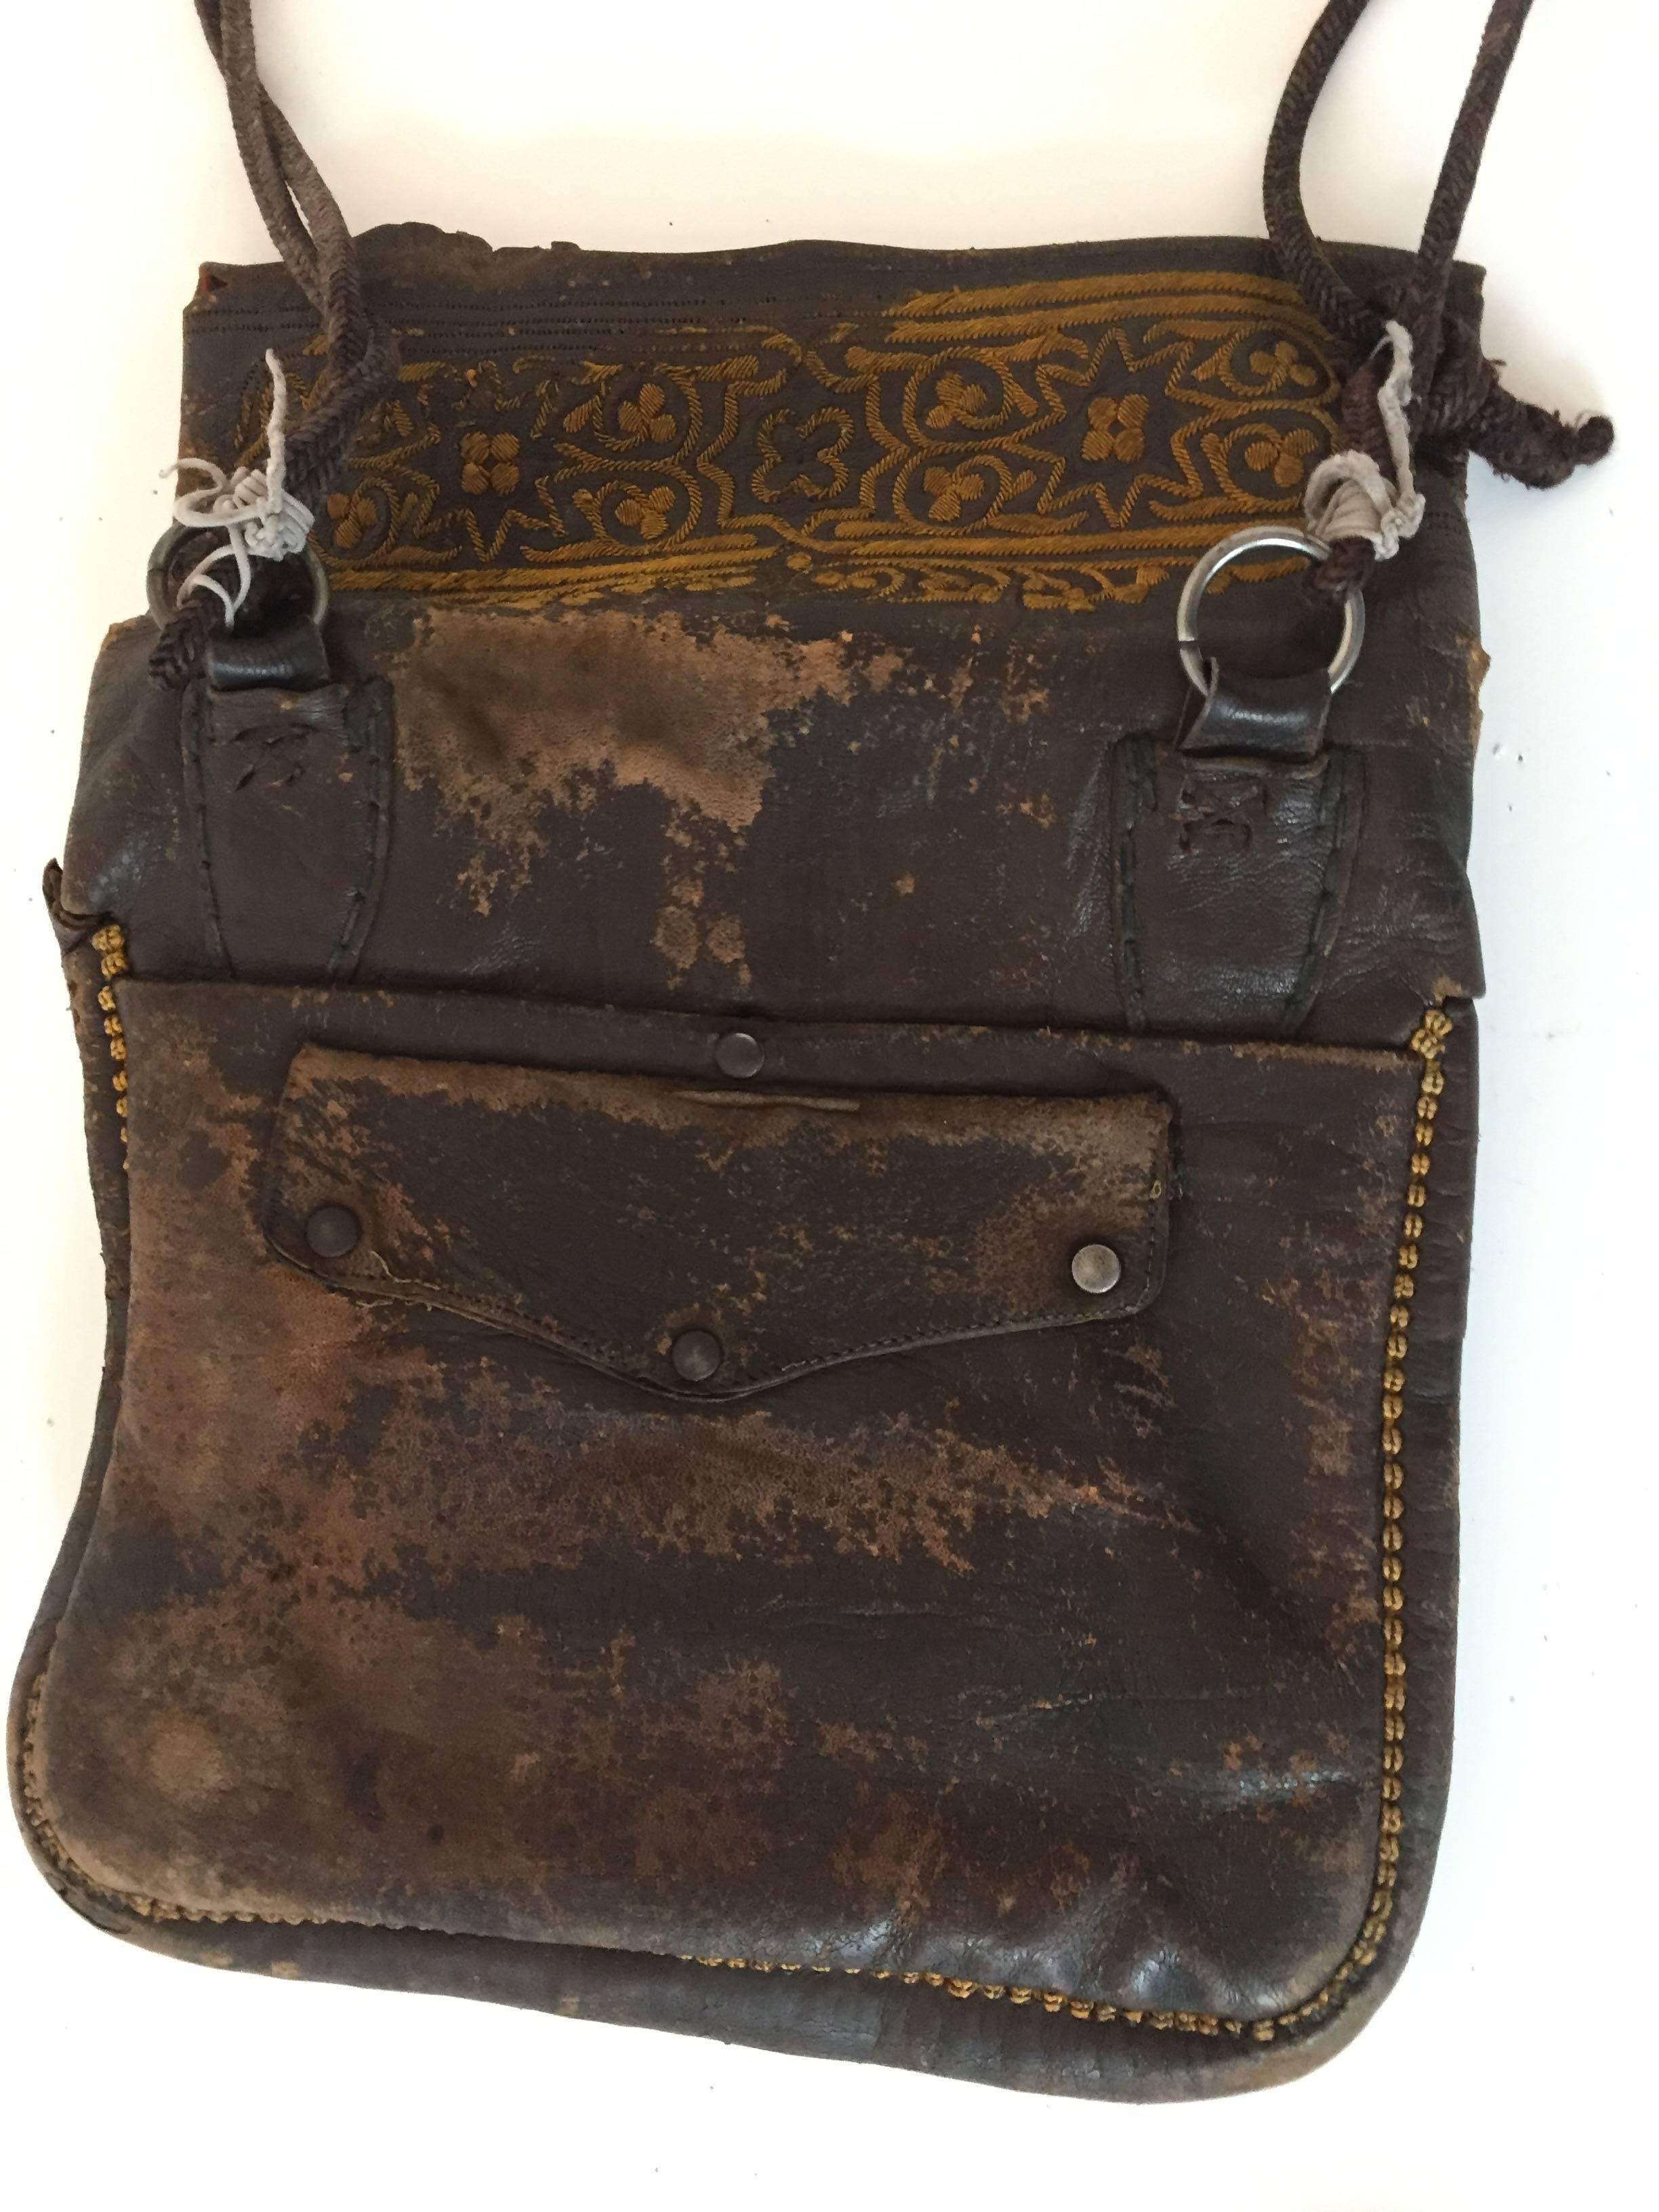 Old leather African Moroccan satchel bag with flap decorated with tribal embroideries.
Hand-tooled in Marrakech, this is an old antique man shoulder slim bag, merchants in Morocco when travelling used this bag under their coat to put their money